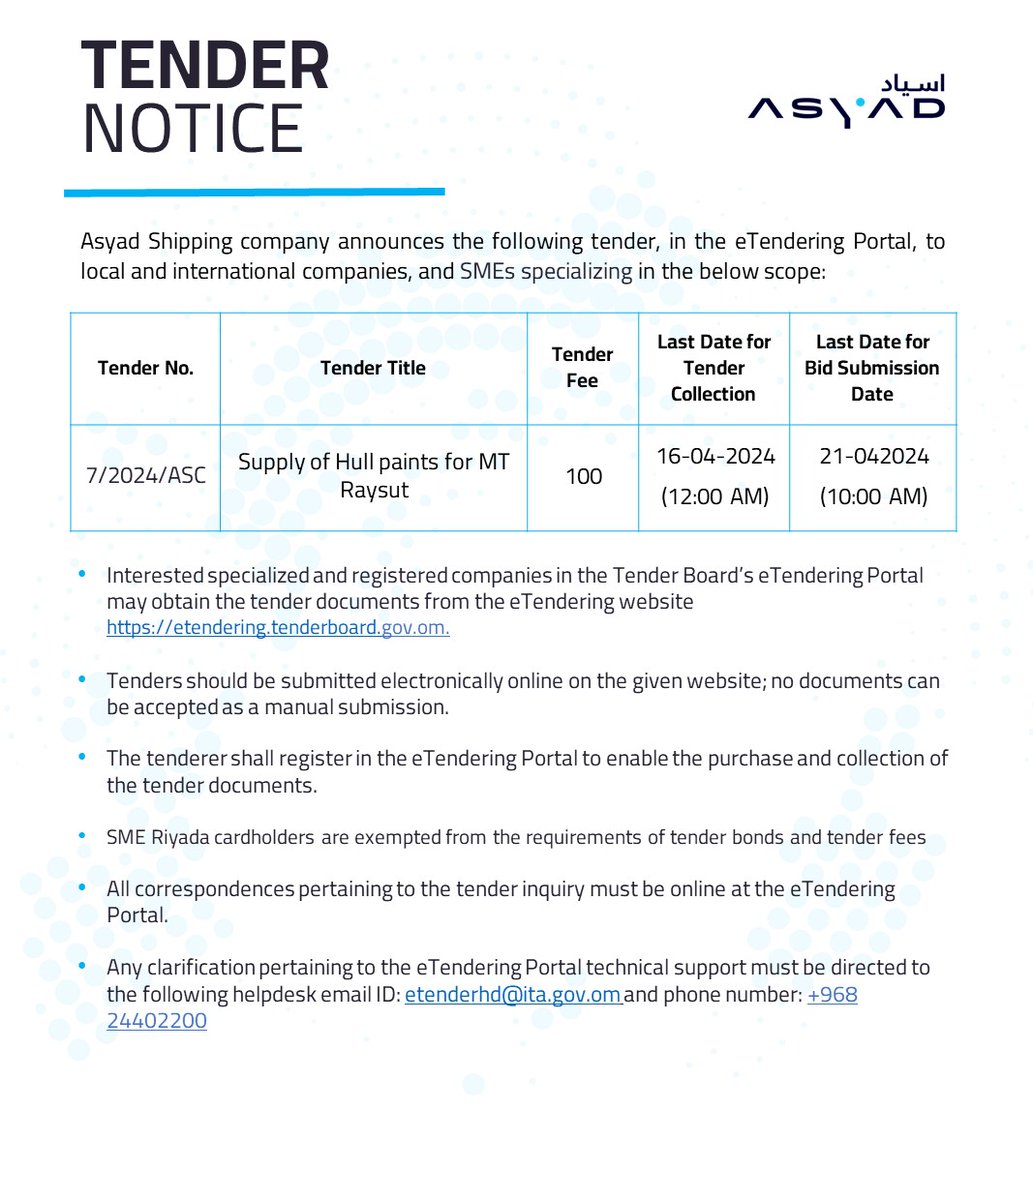 Asyad Shipping announces the following tender, in the eTendering Portal, to local and international companies, and SMEs specializing in the below scope.